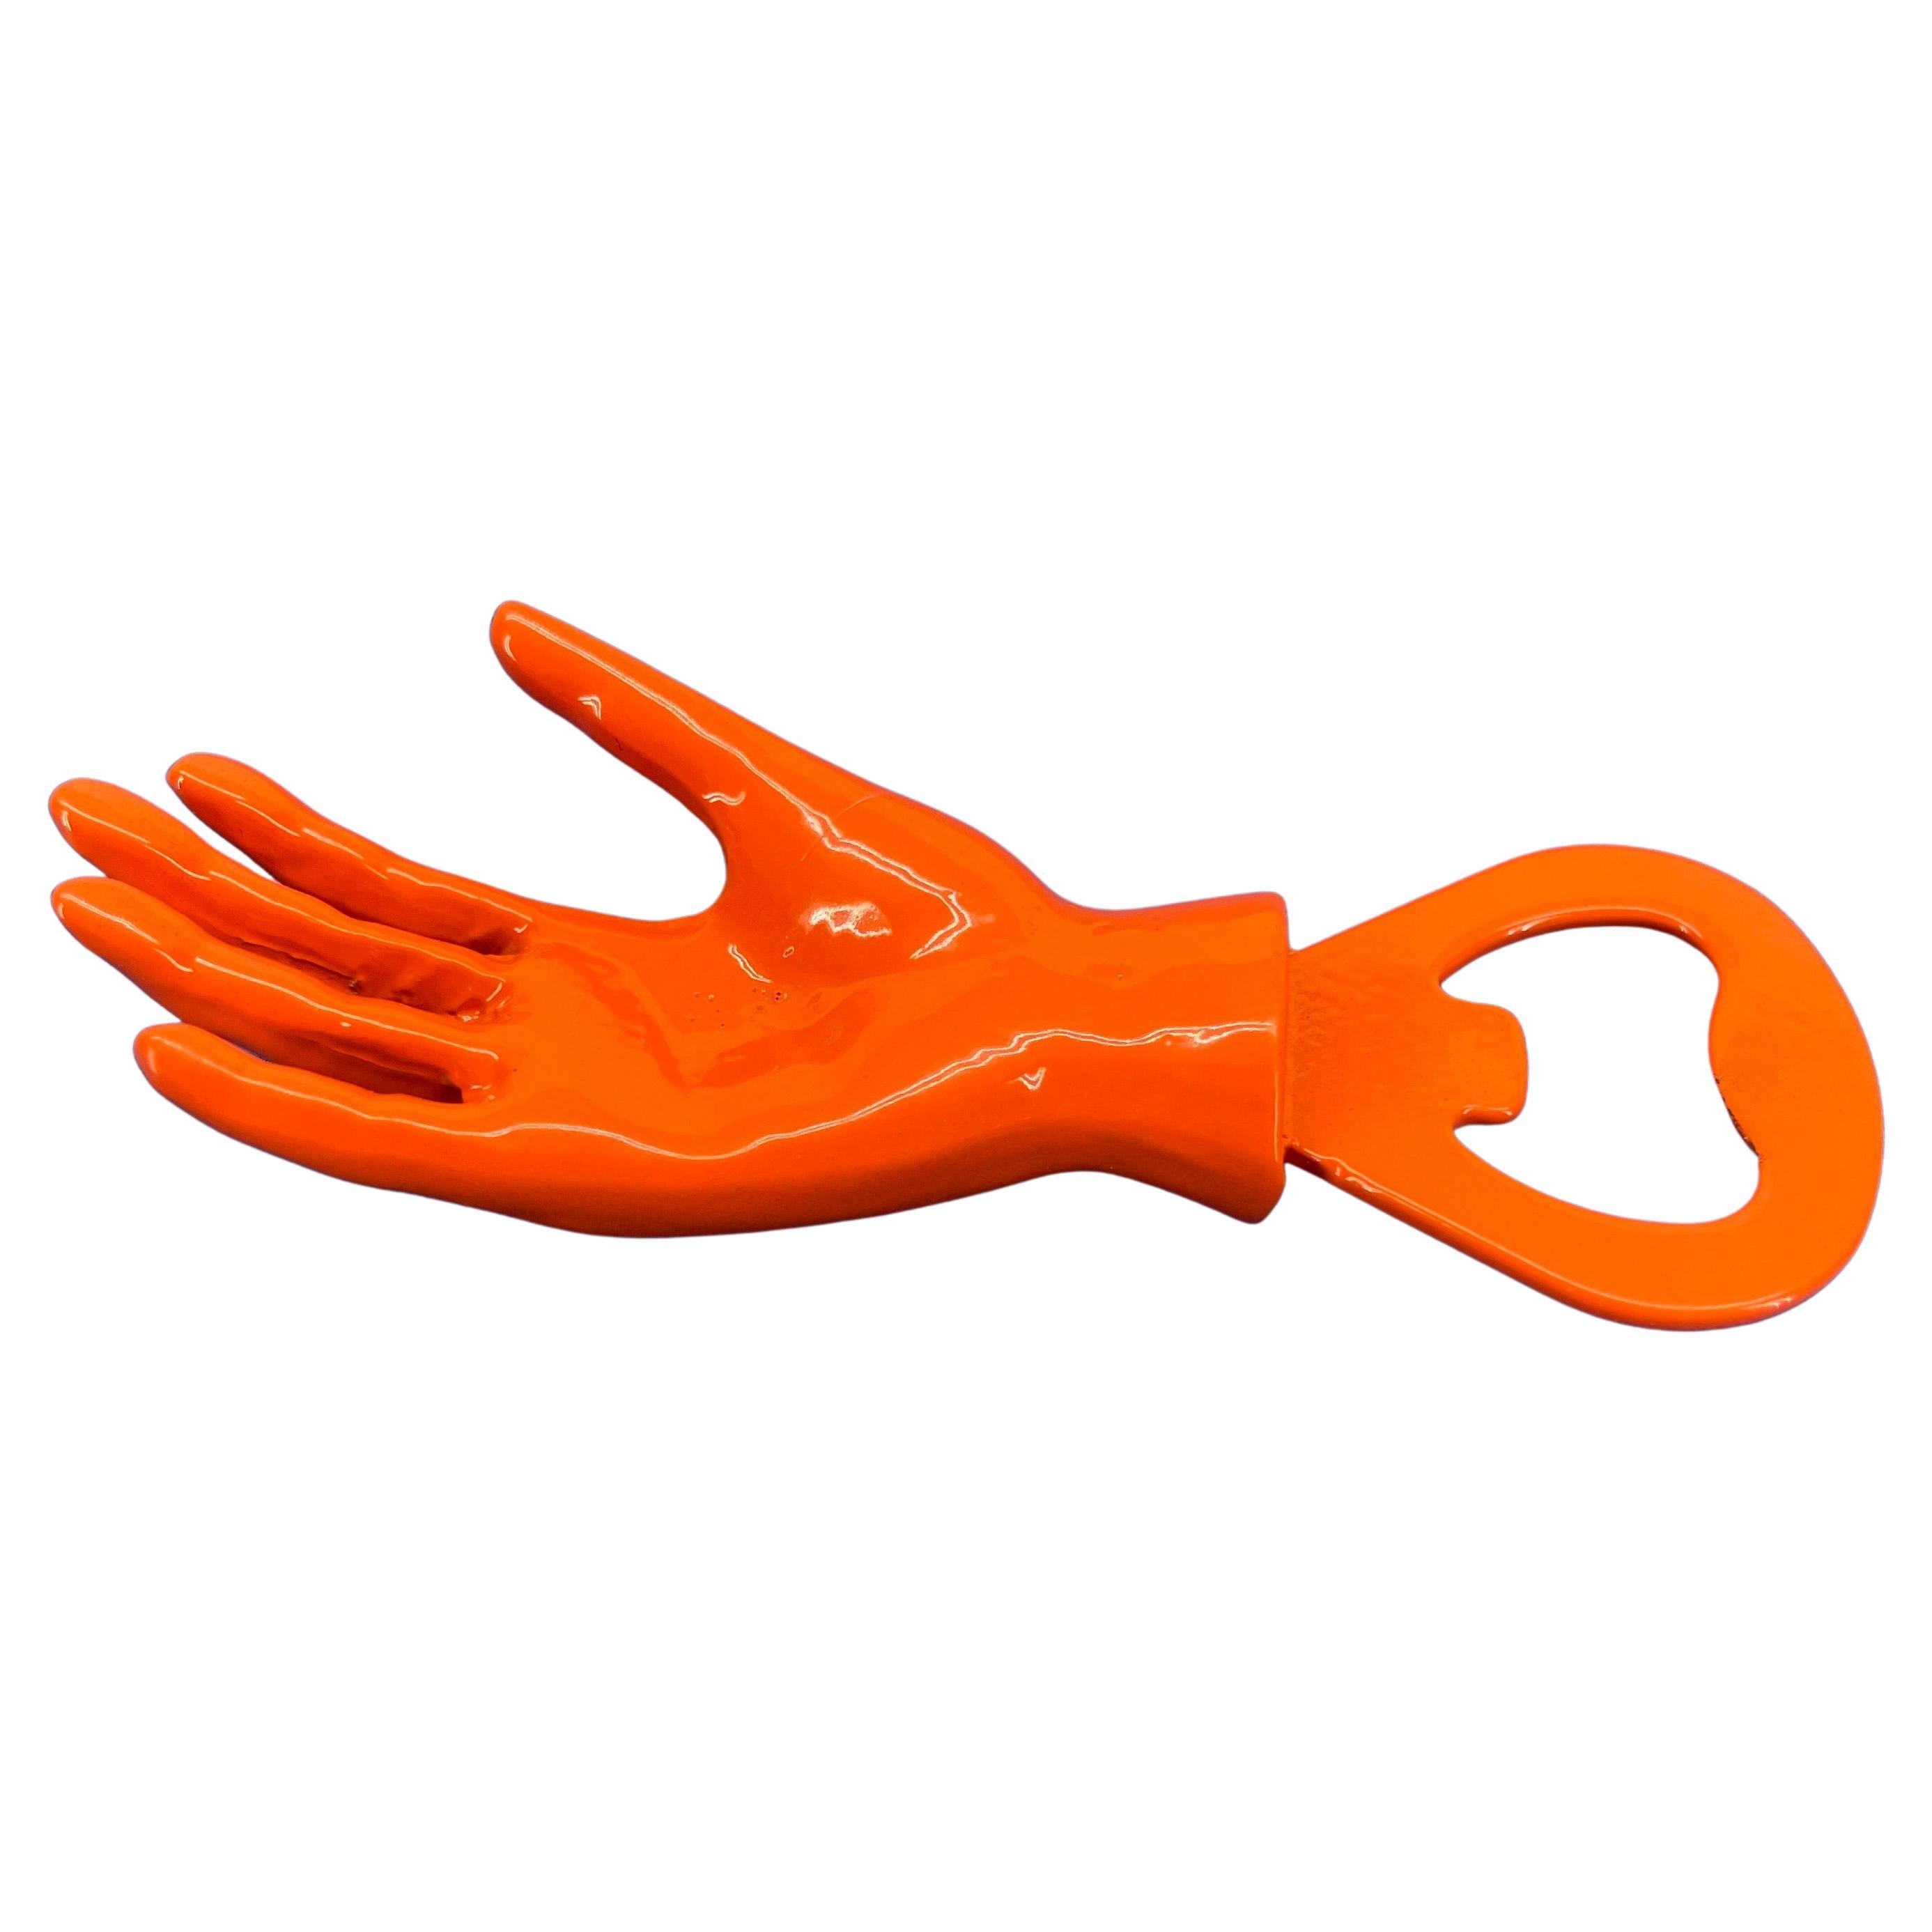 Modern bright orange powder coated cast iron bottle opener. In the shape of a hand, reminiscent of Fornasetti hands, this bright and bold bottle opener is sure to please in any bar setting. Small but mighty, the bottle opener will put a smile on